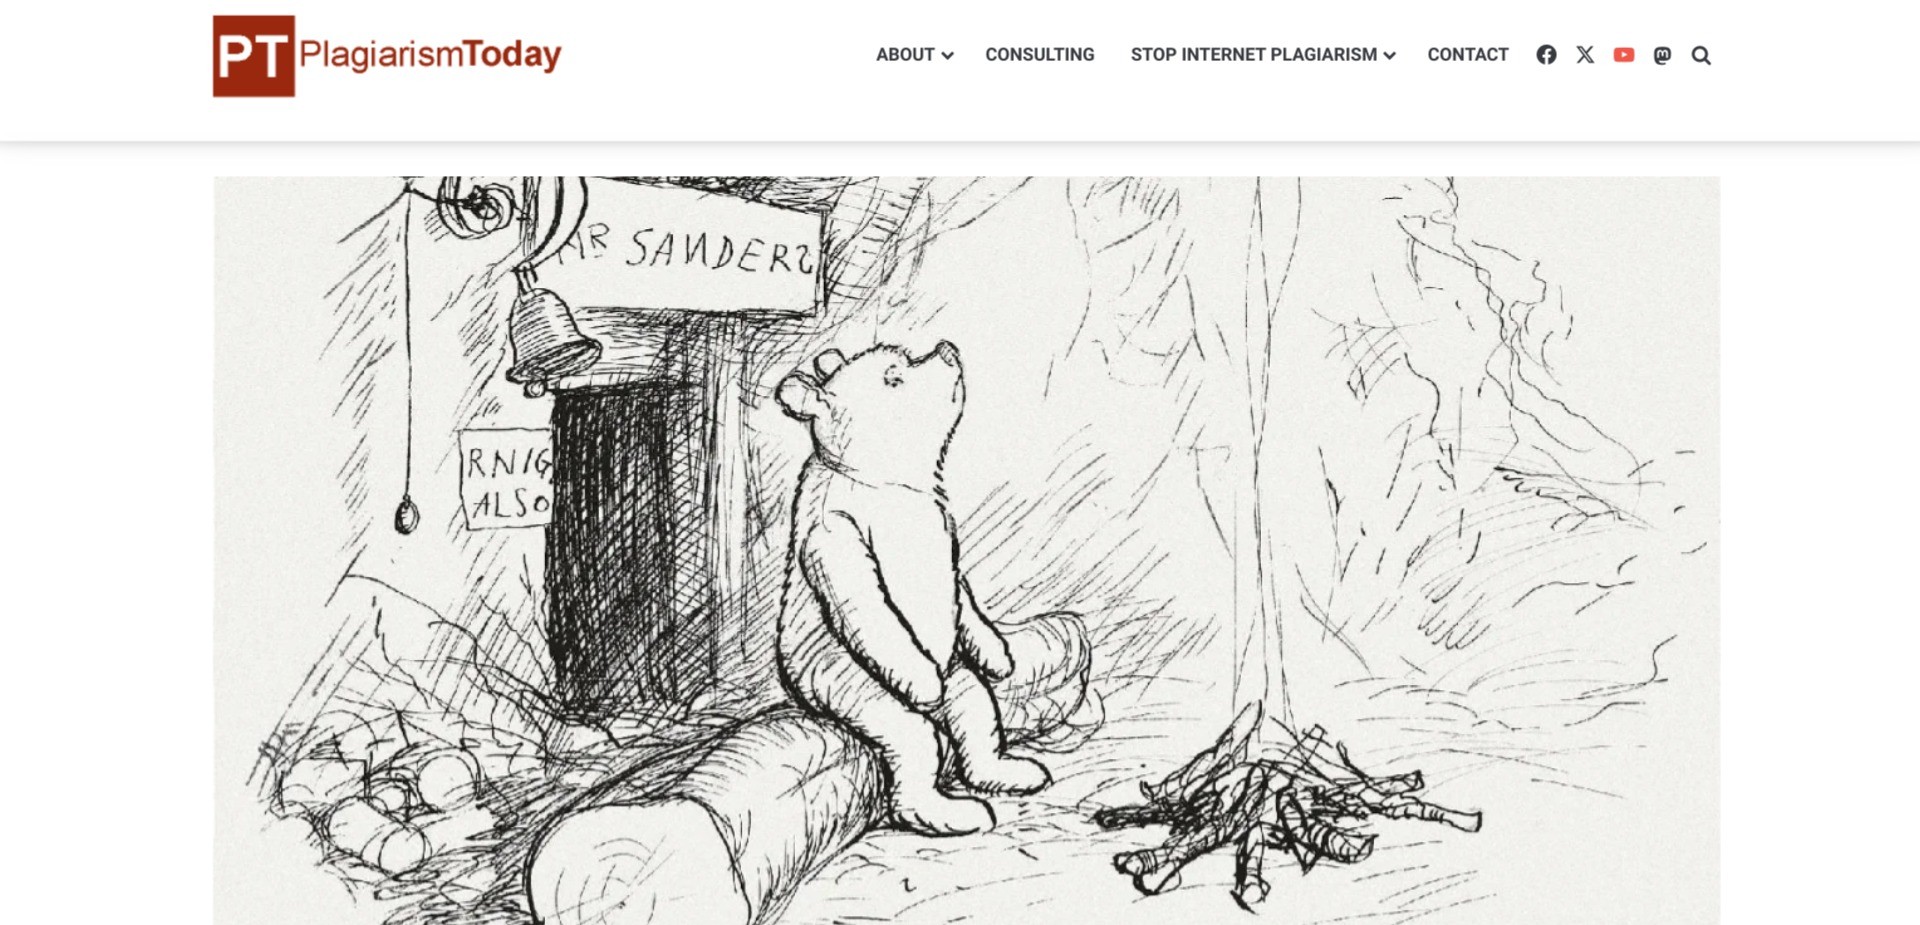 Screenshot of plagiarismtoday.com displaying one of the original Winnie-the-Pooh illustrations